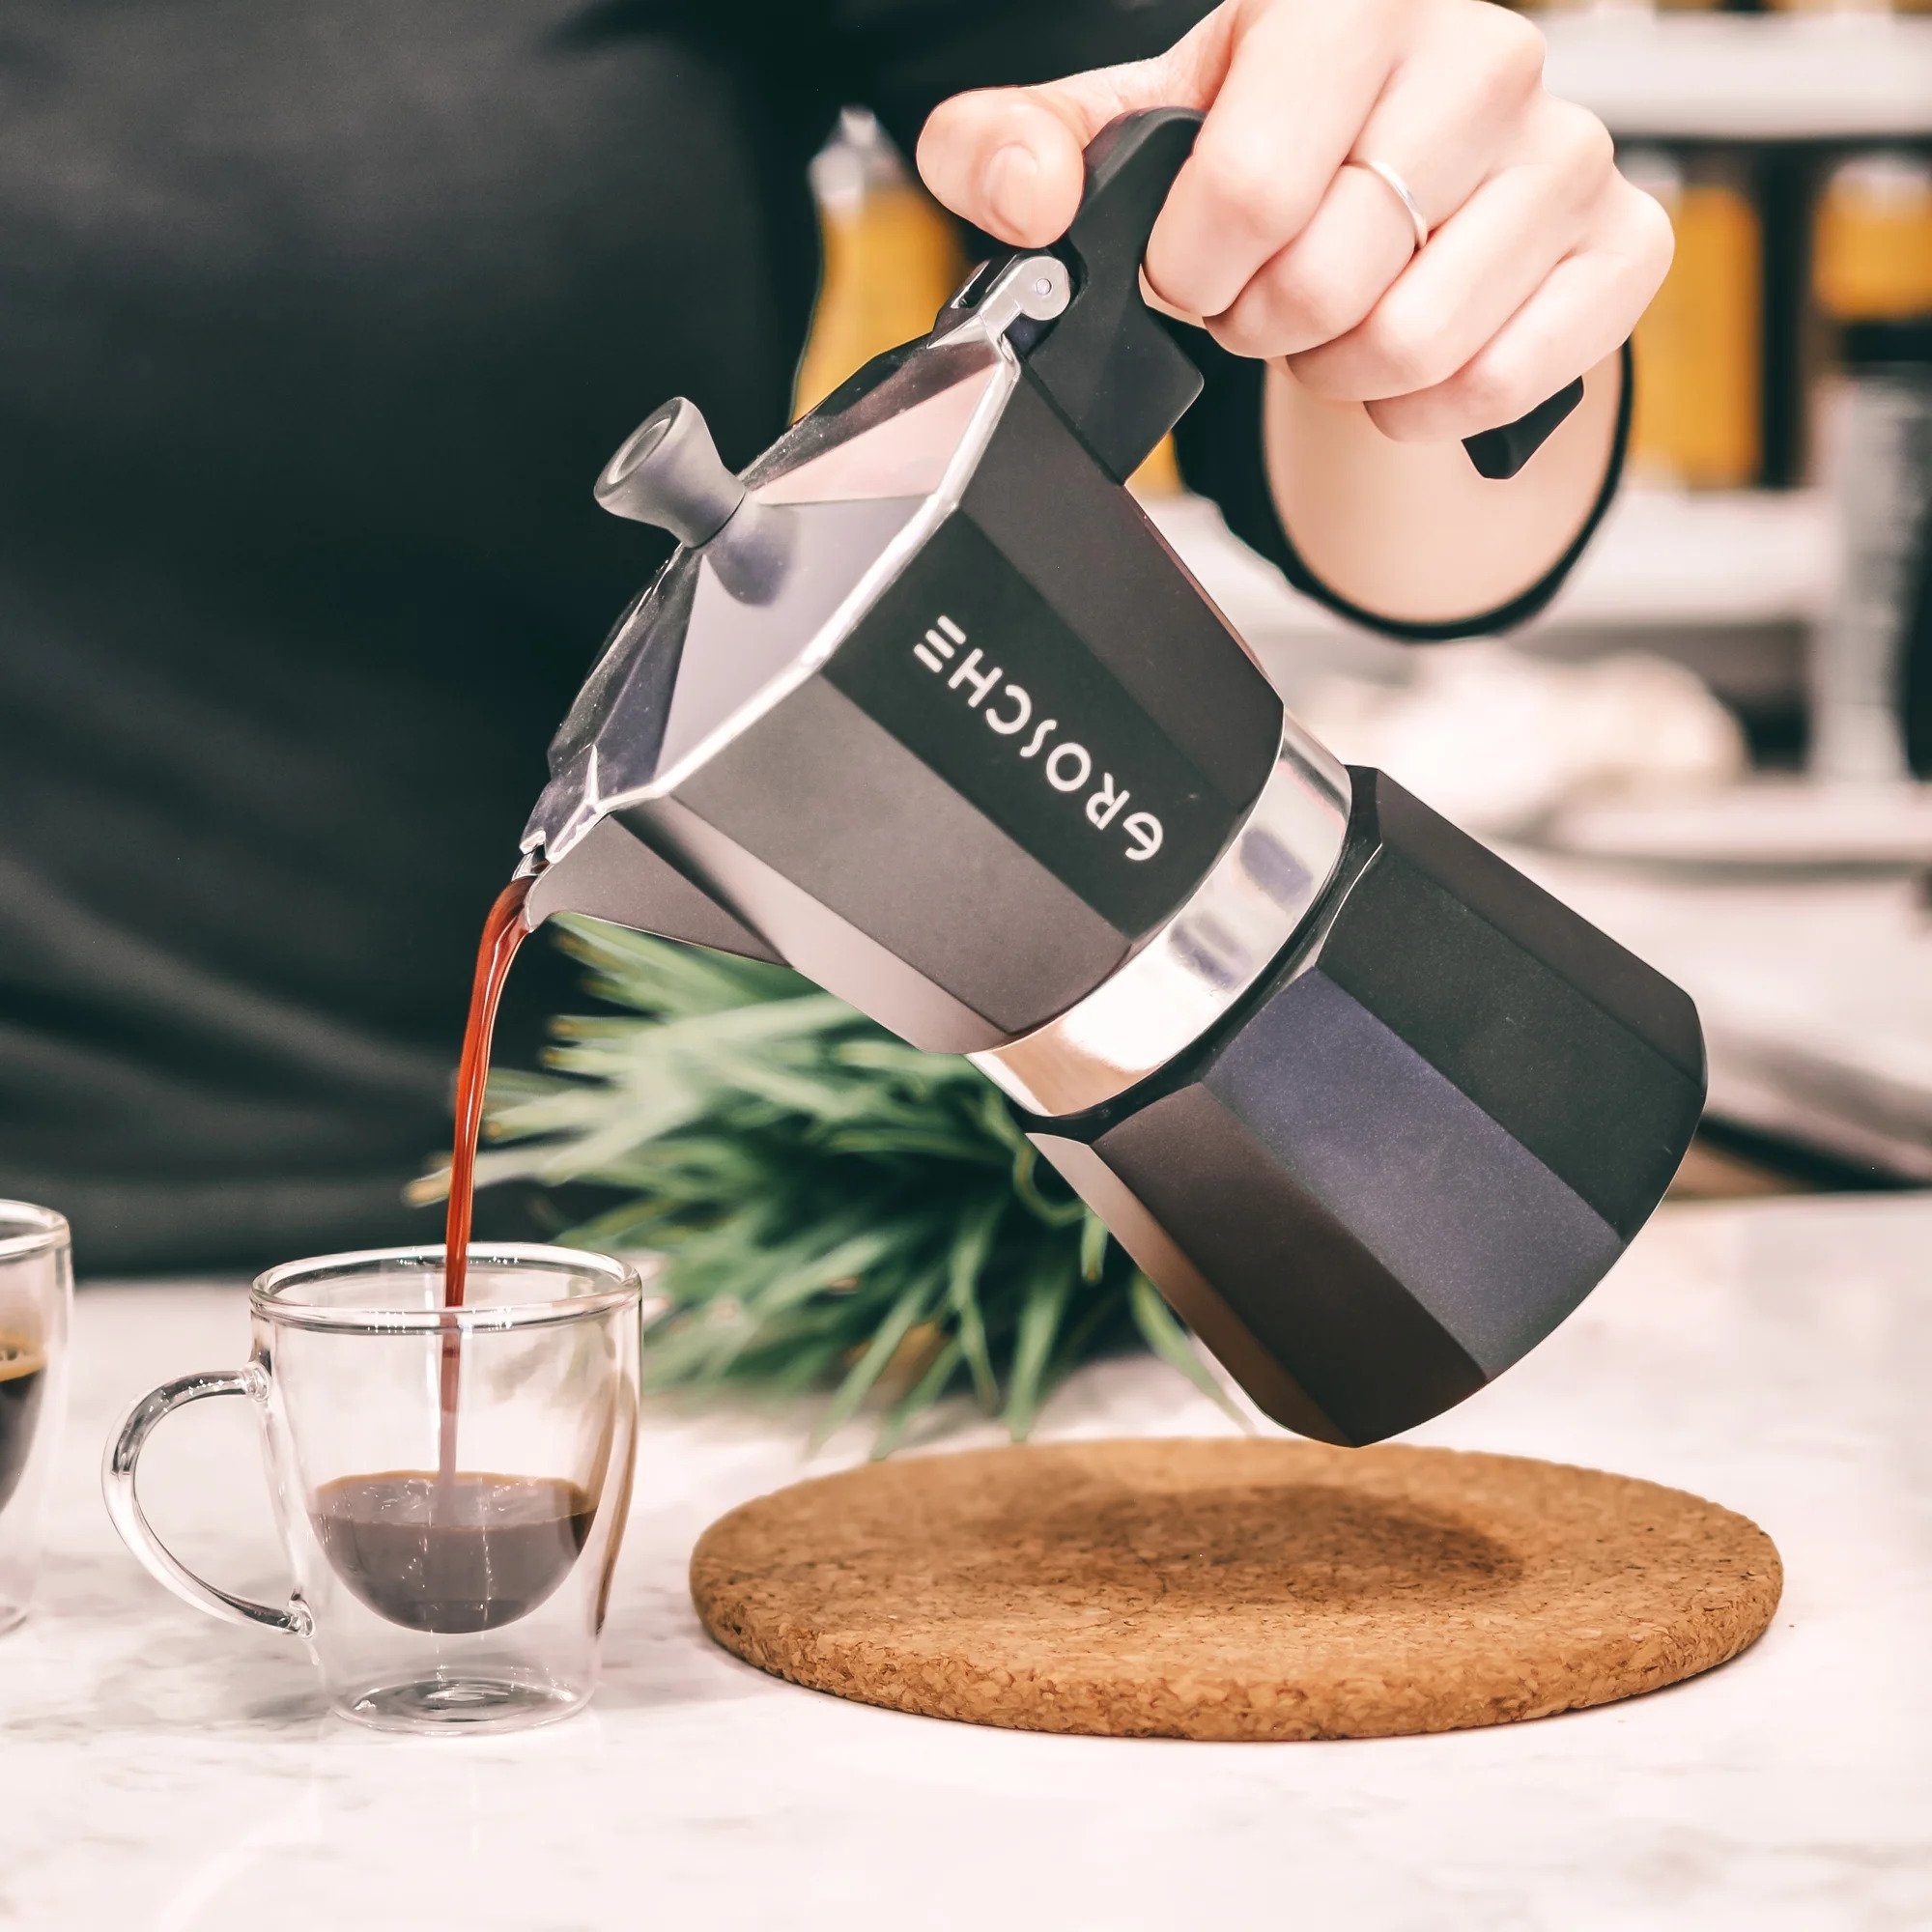 A person pouring espresso out from the percolator